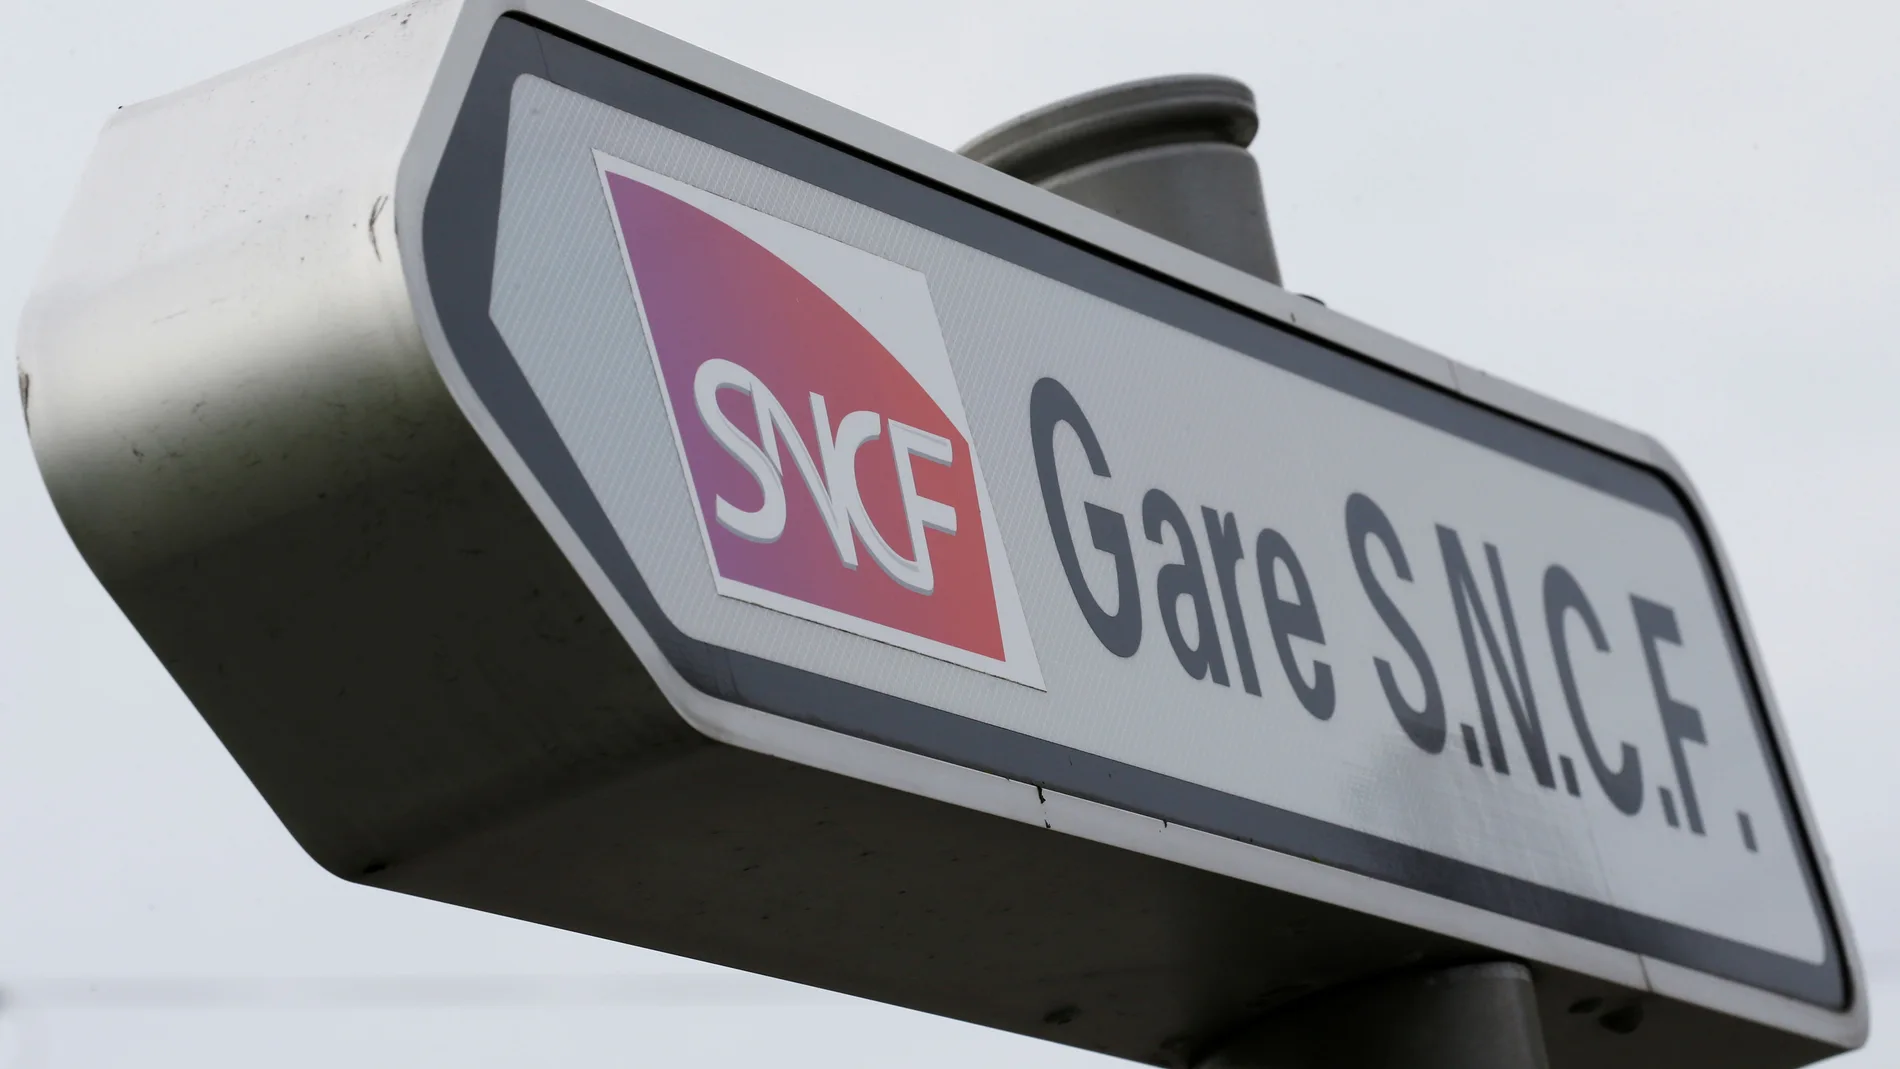 The logo of French state-owned railway company SNCF is pictured at Bordeaux railway station during a strike by French SNCF railway workers in Bordeaux